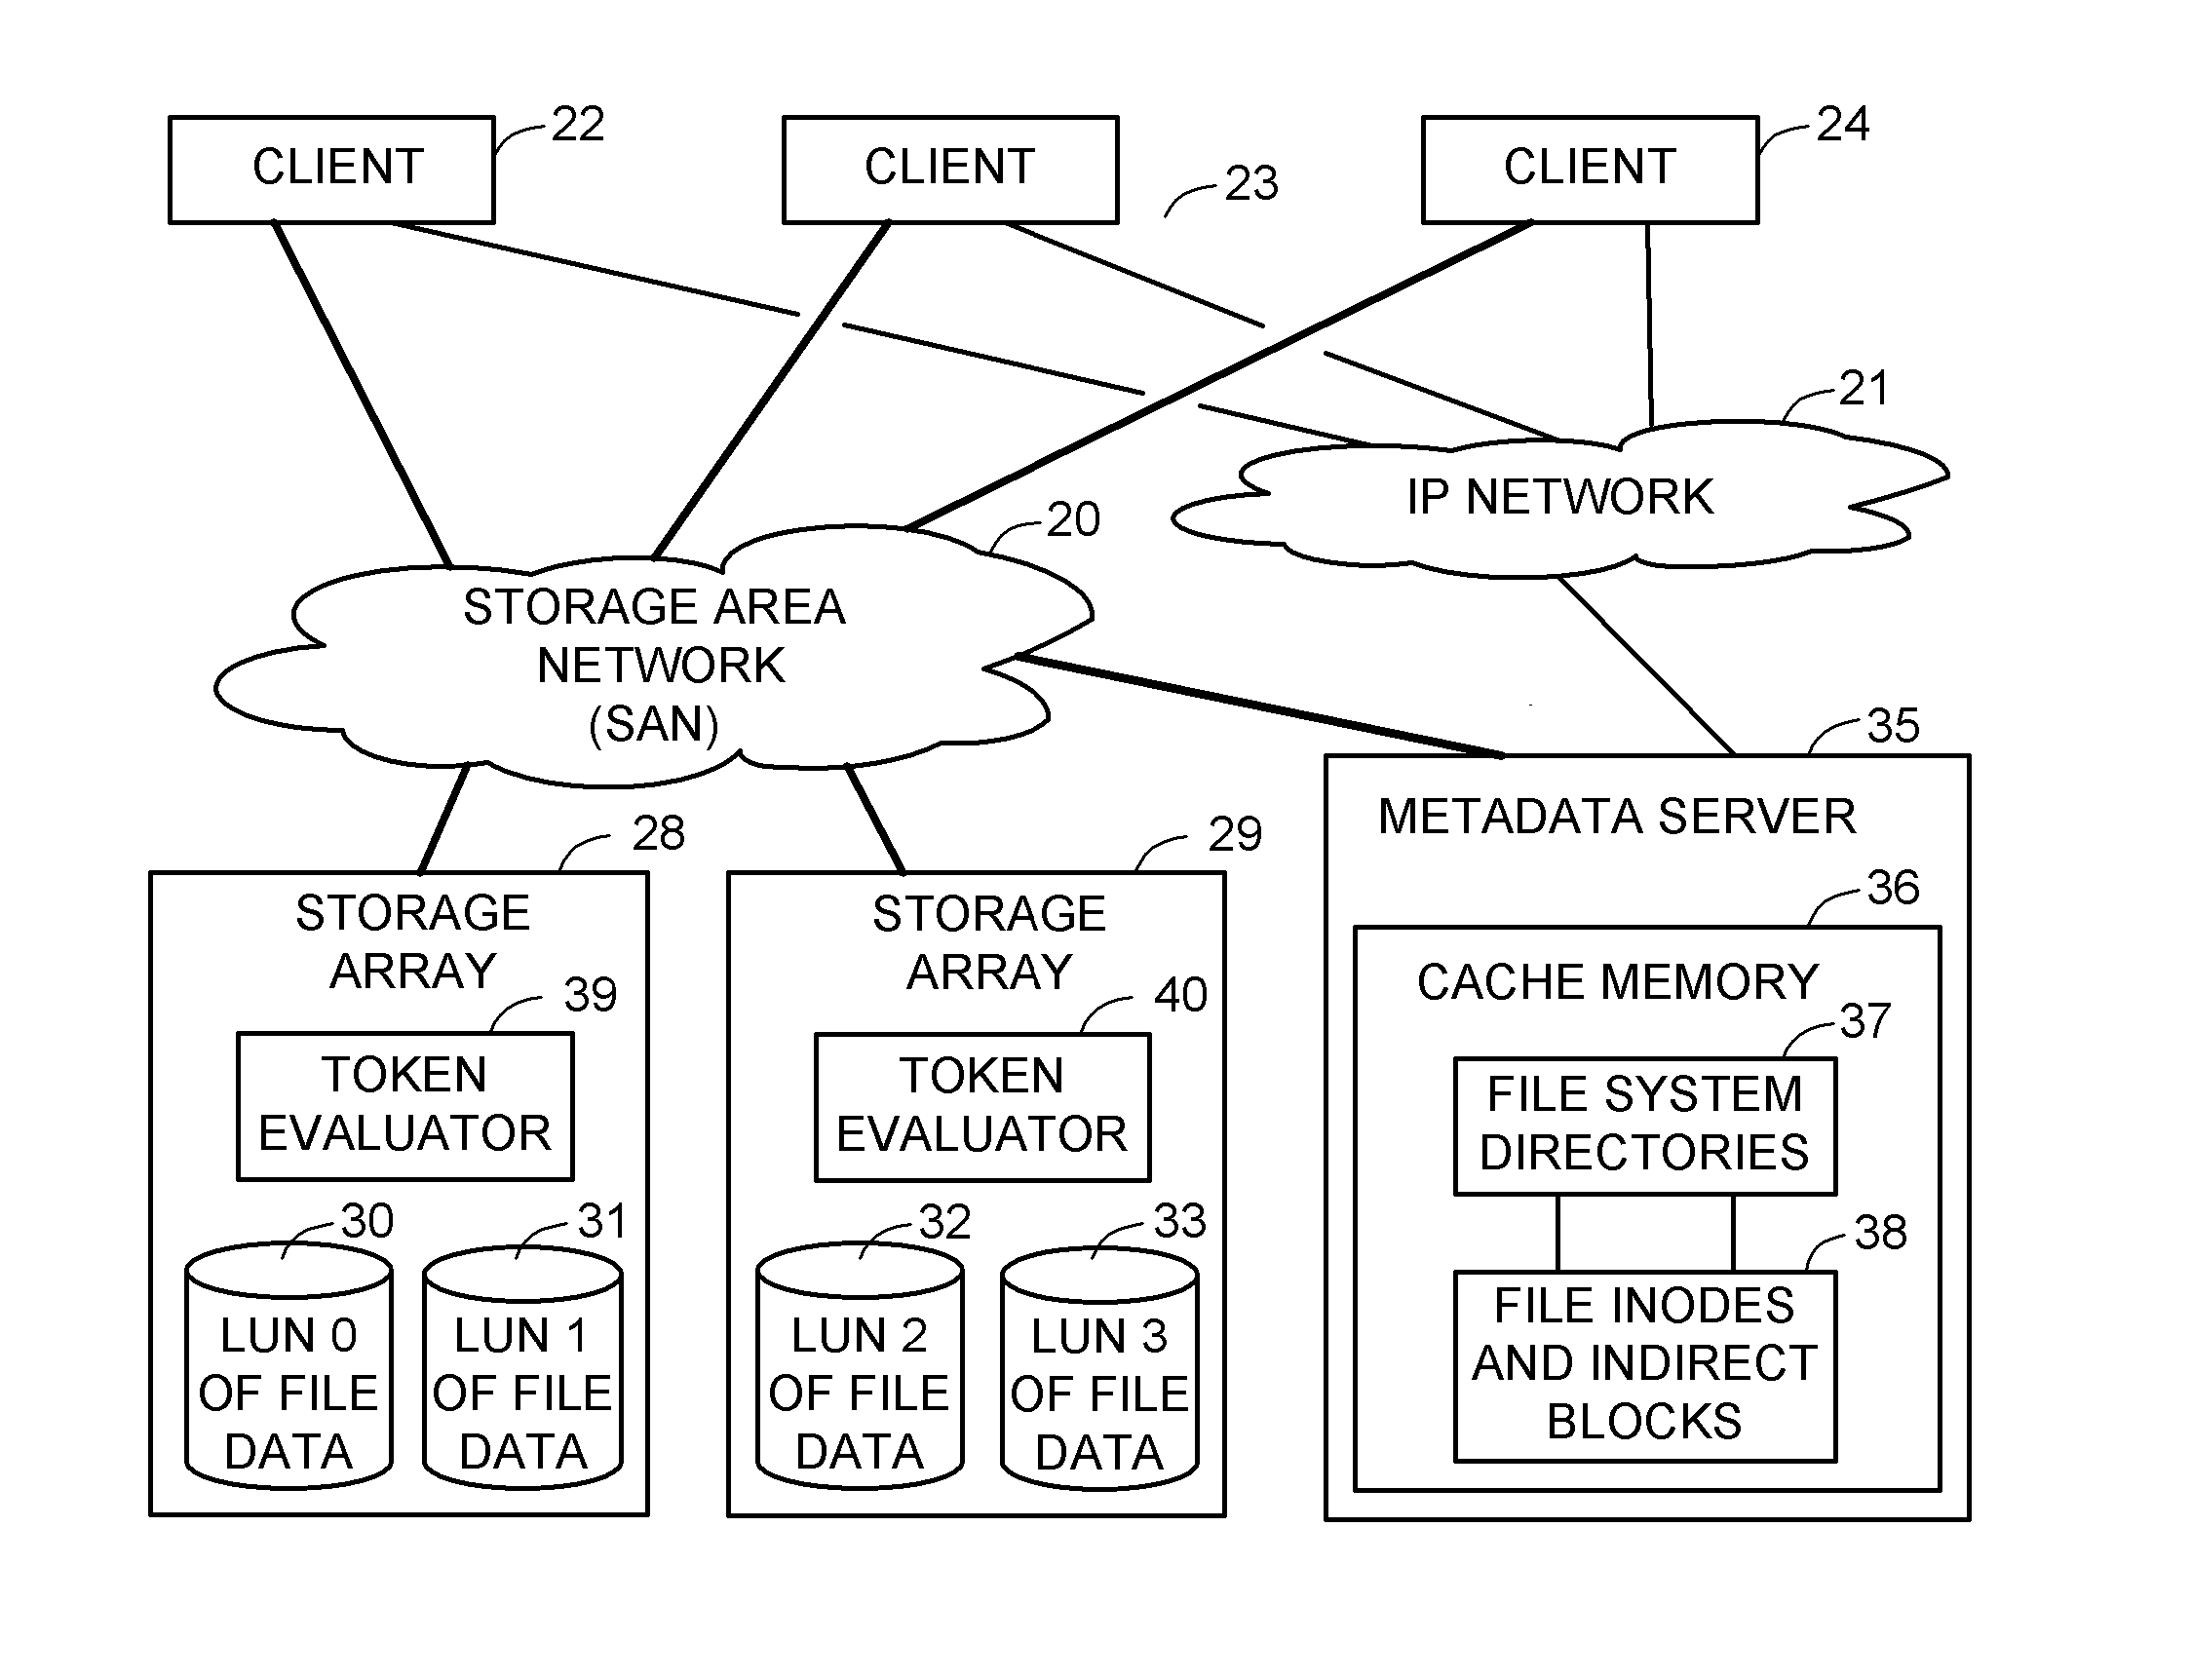 Access control to block storage devices for a shared disk based file system